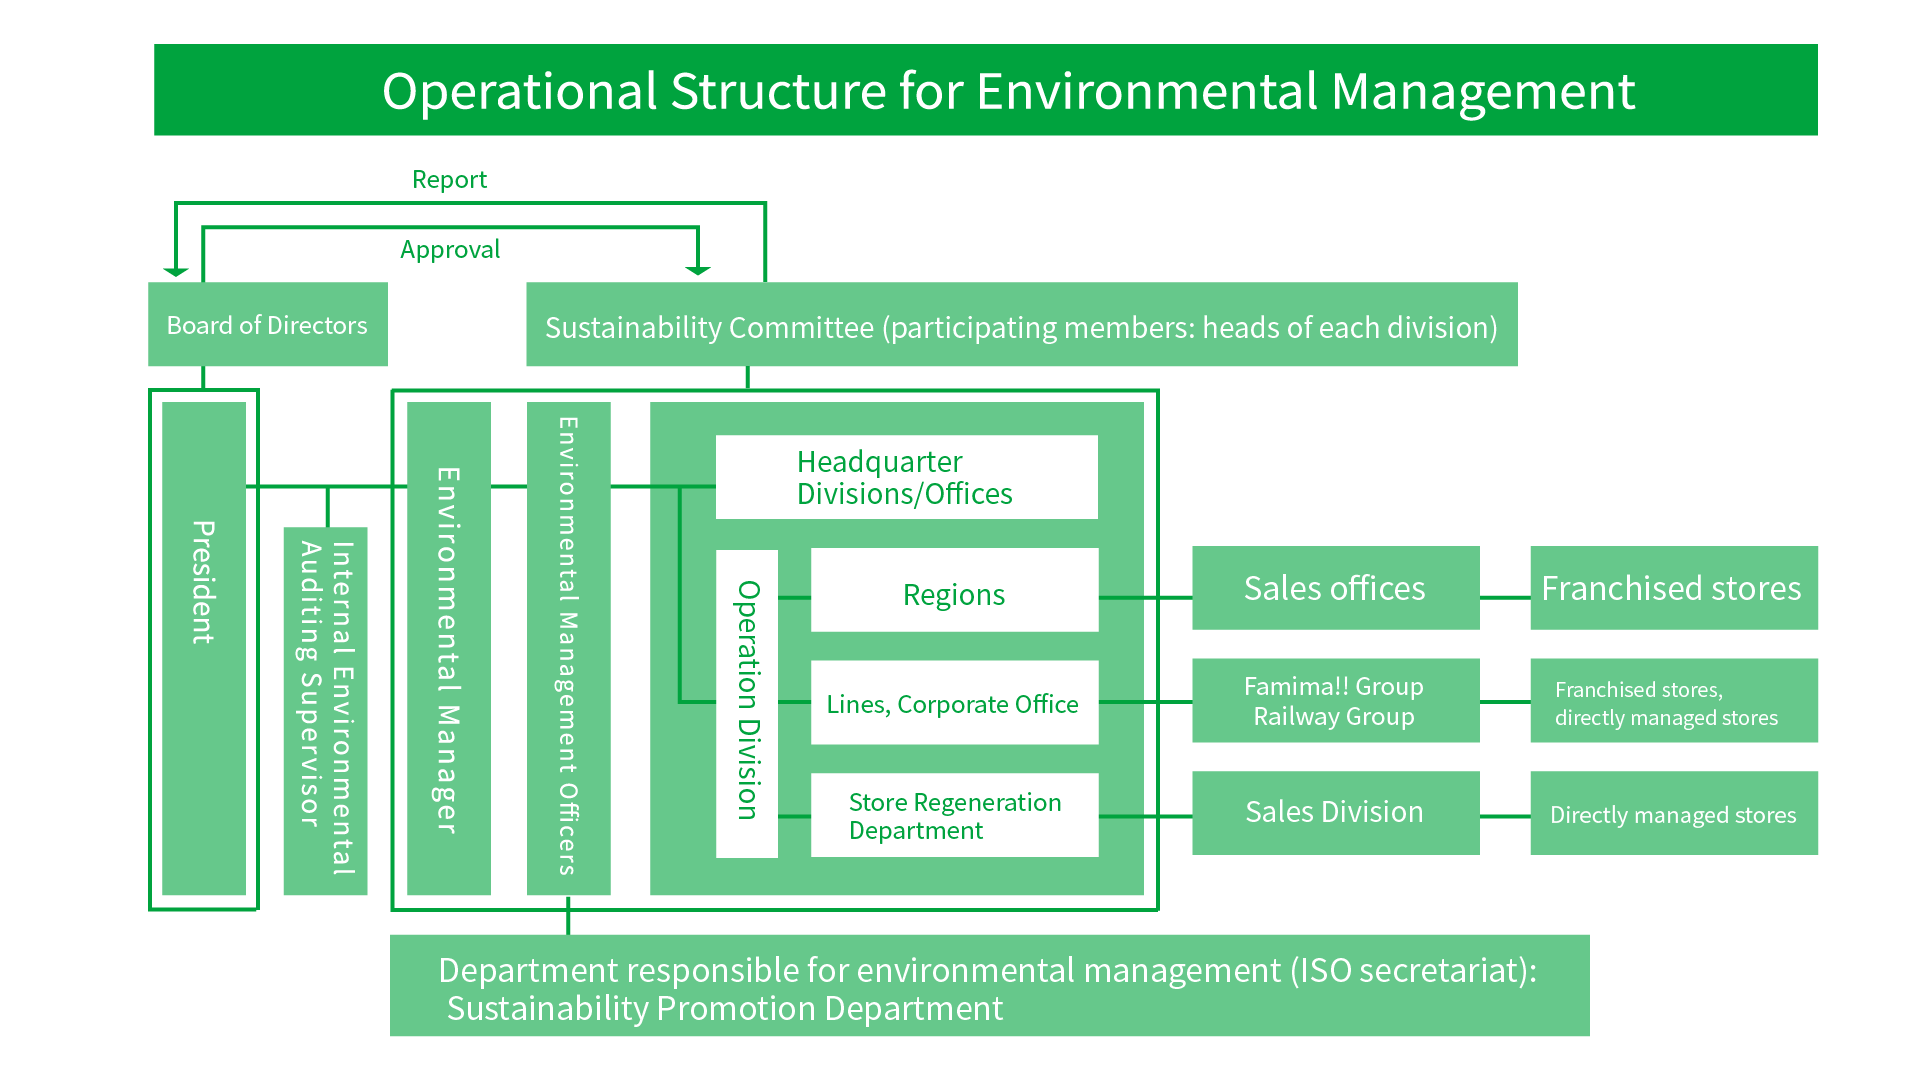 Operational Structure for Environmental Manegement